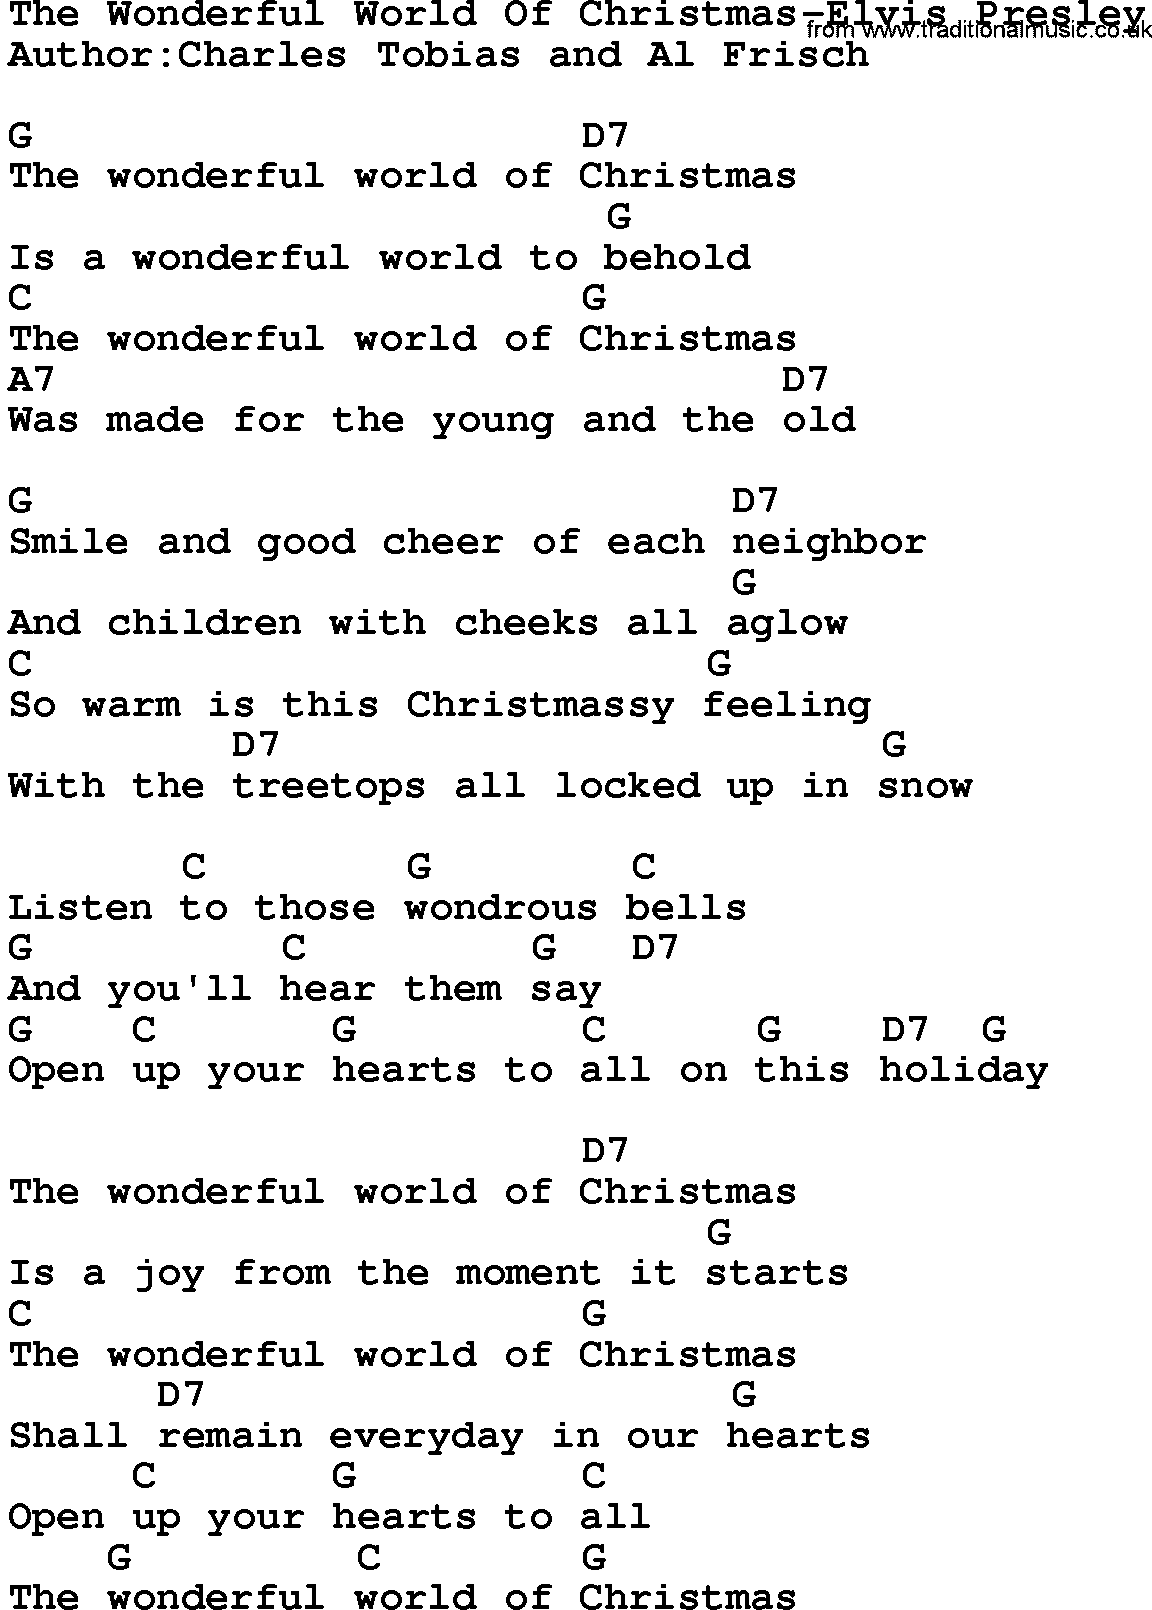 Country music song: The Wonderful World Of Christmas-Elvis Presley lyrics and chords